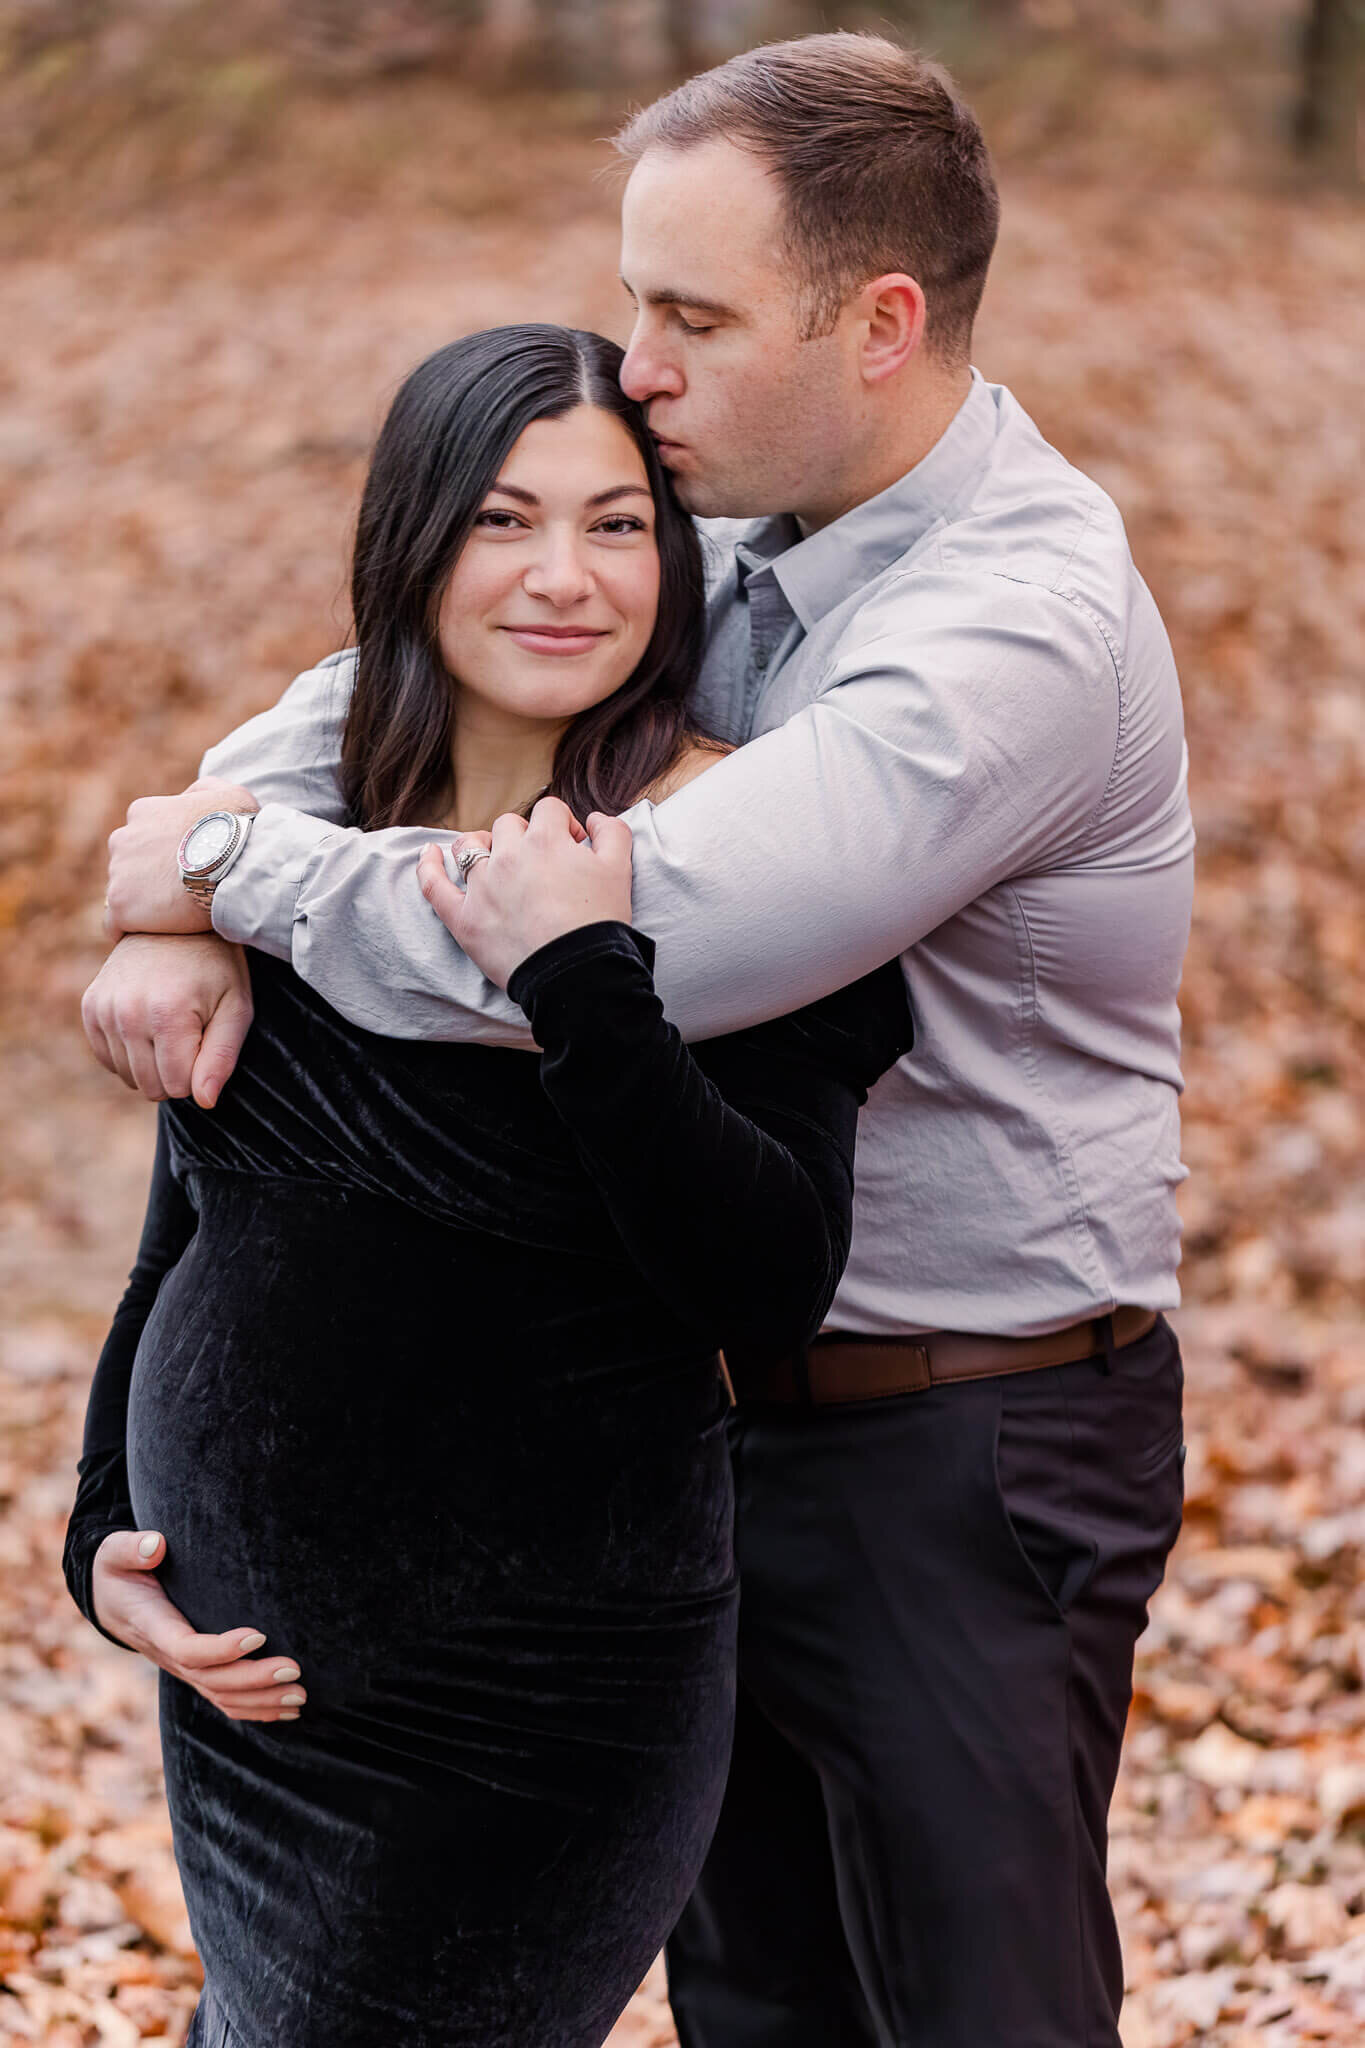 An expecting couple embracing during their maternity portraits.